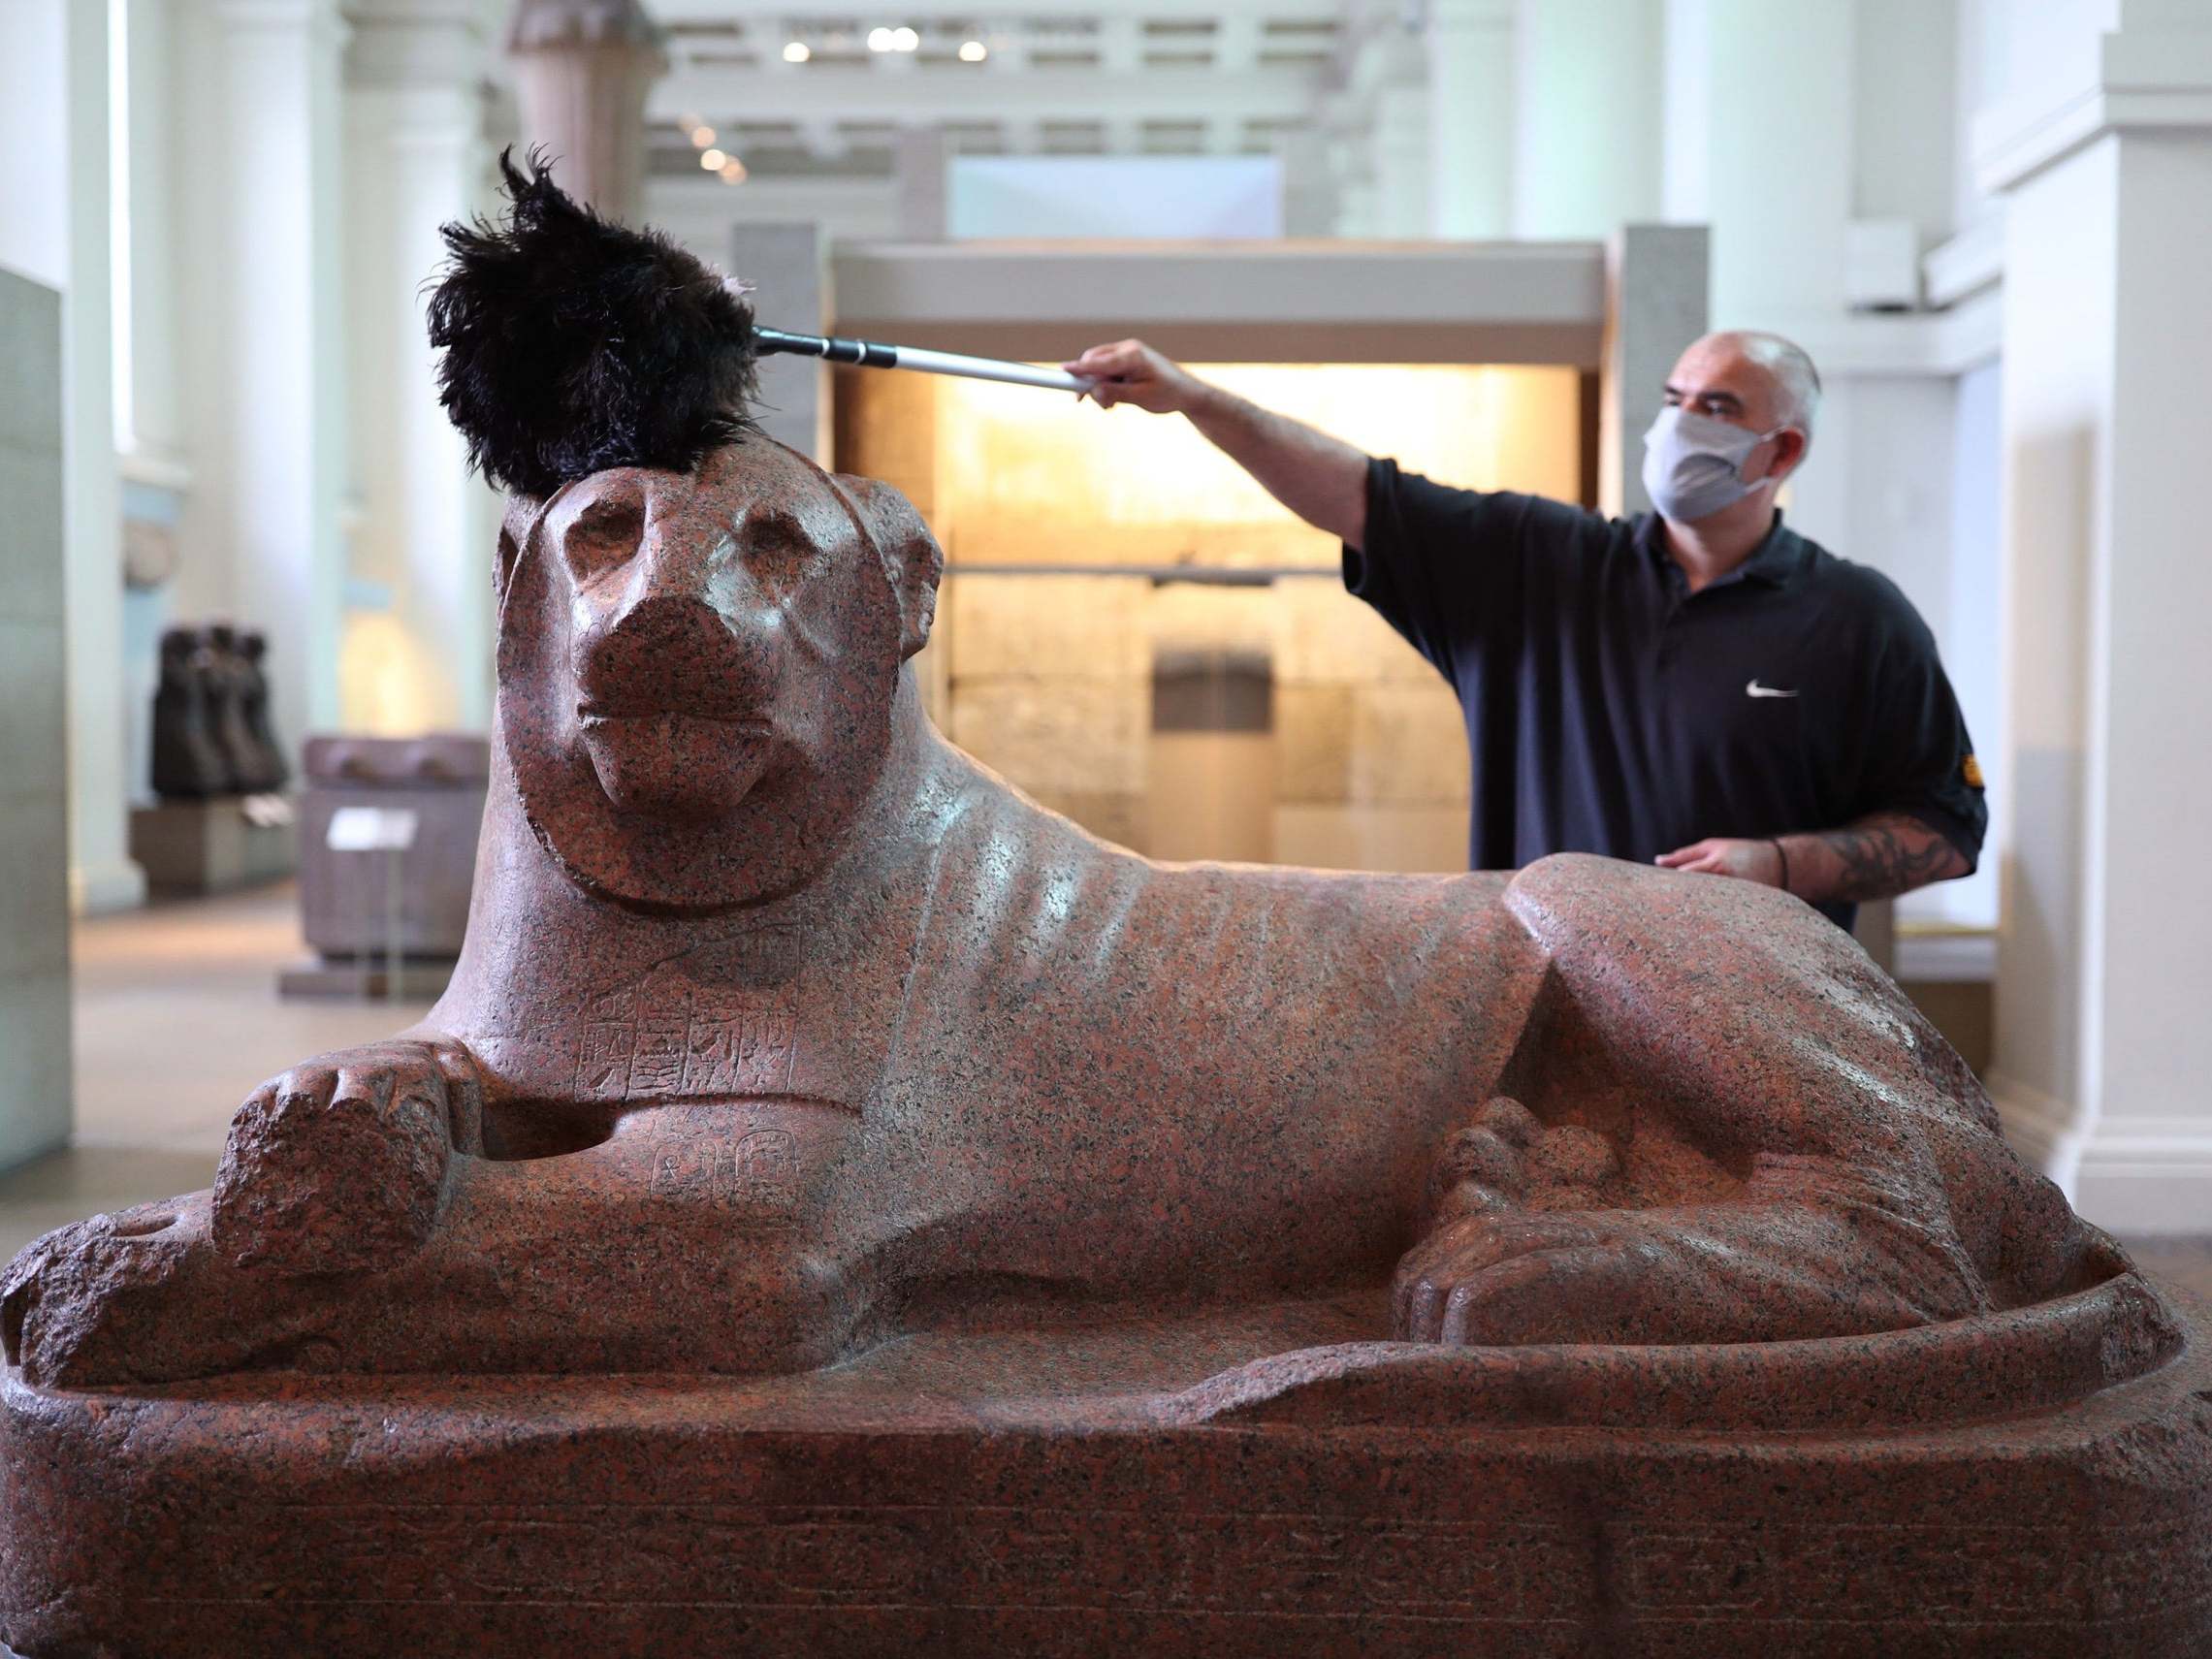 A sculpture of King Amenhotep III as a lion is cleaned in the museum’s Egyptian gallery